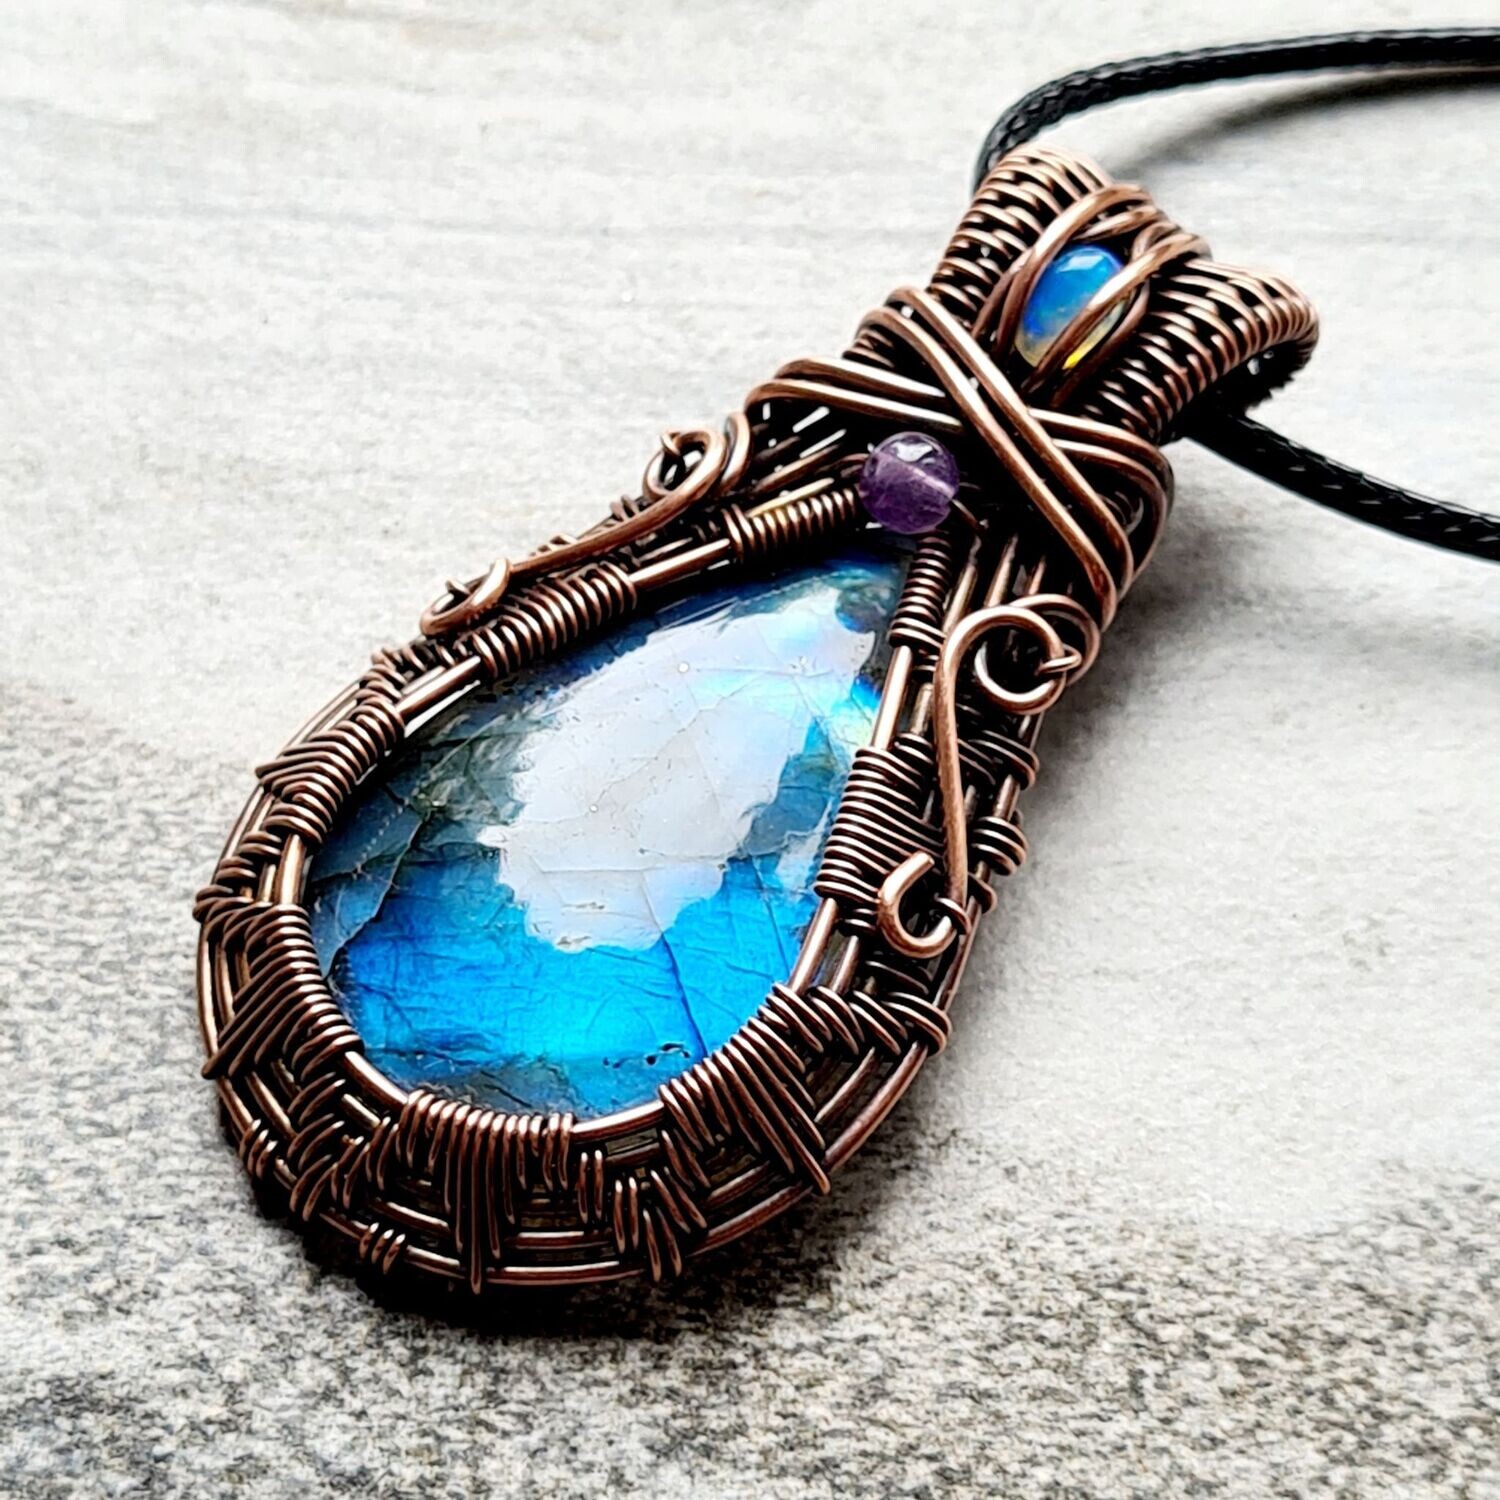 Blue Labradorite with WELO Opal and Amethyst accents pendant with chain.